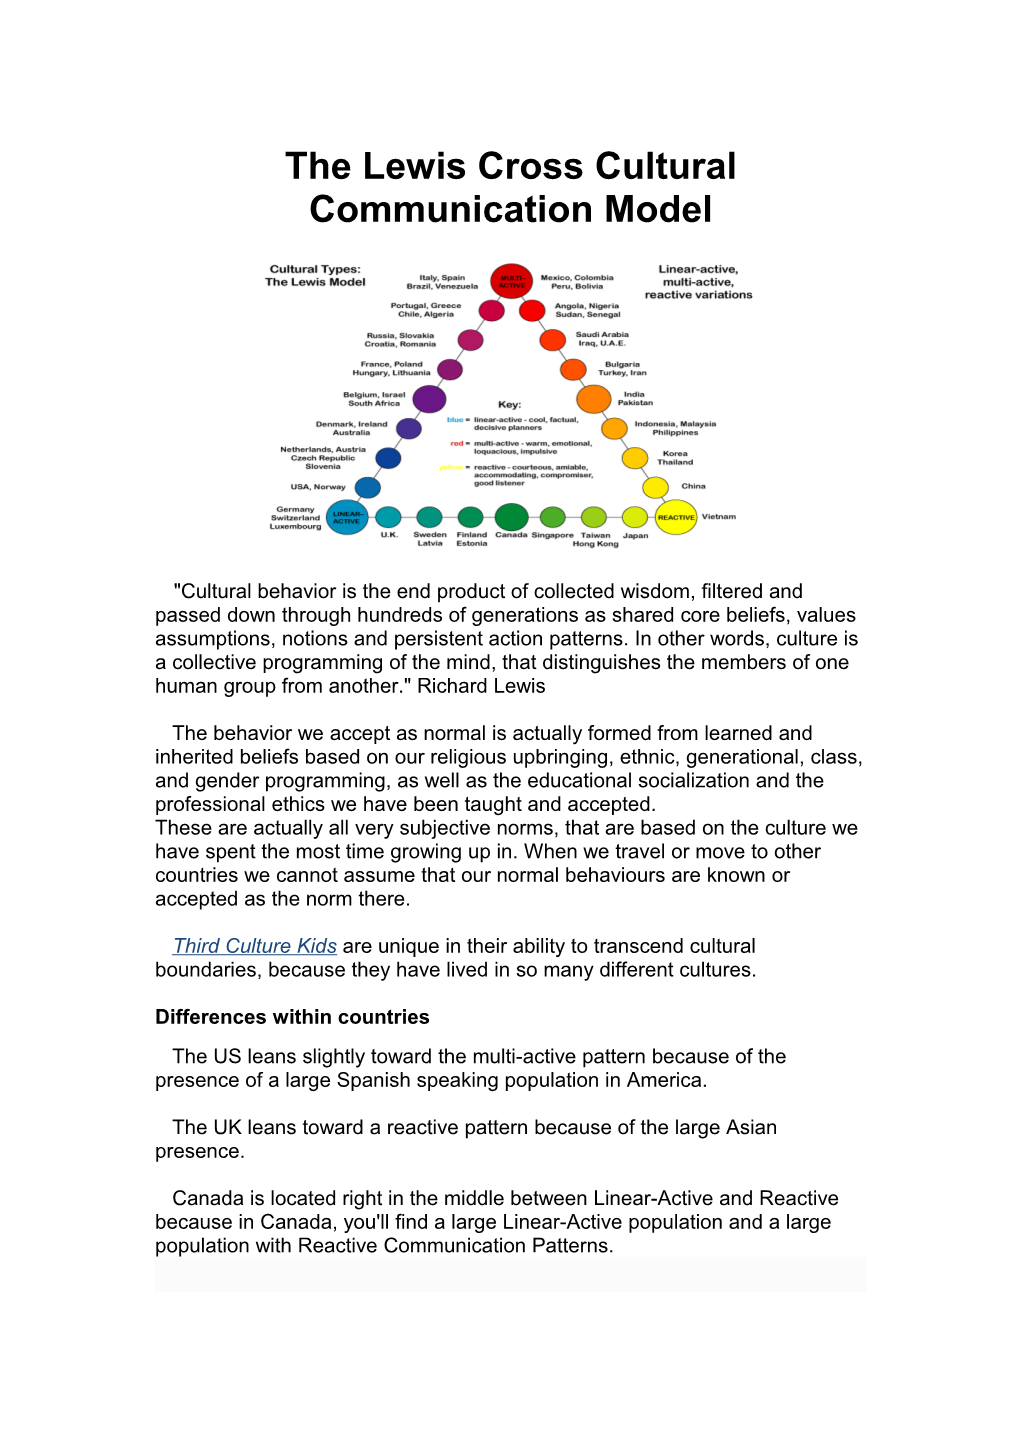 The Lewis Cross Cultural Communication Model